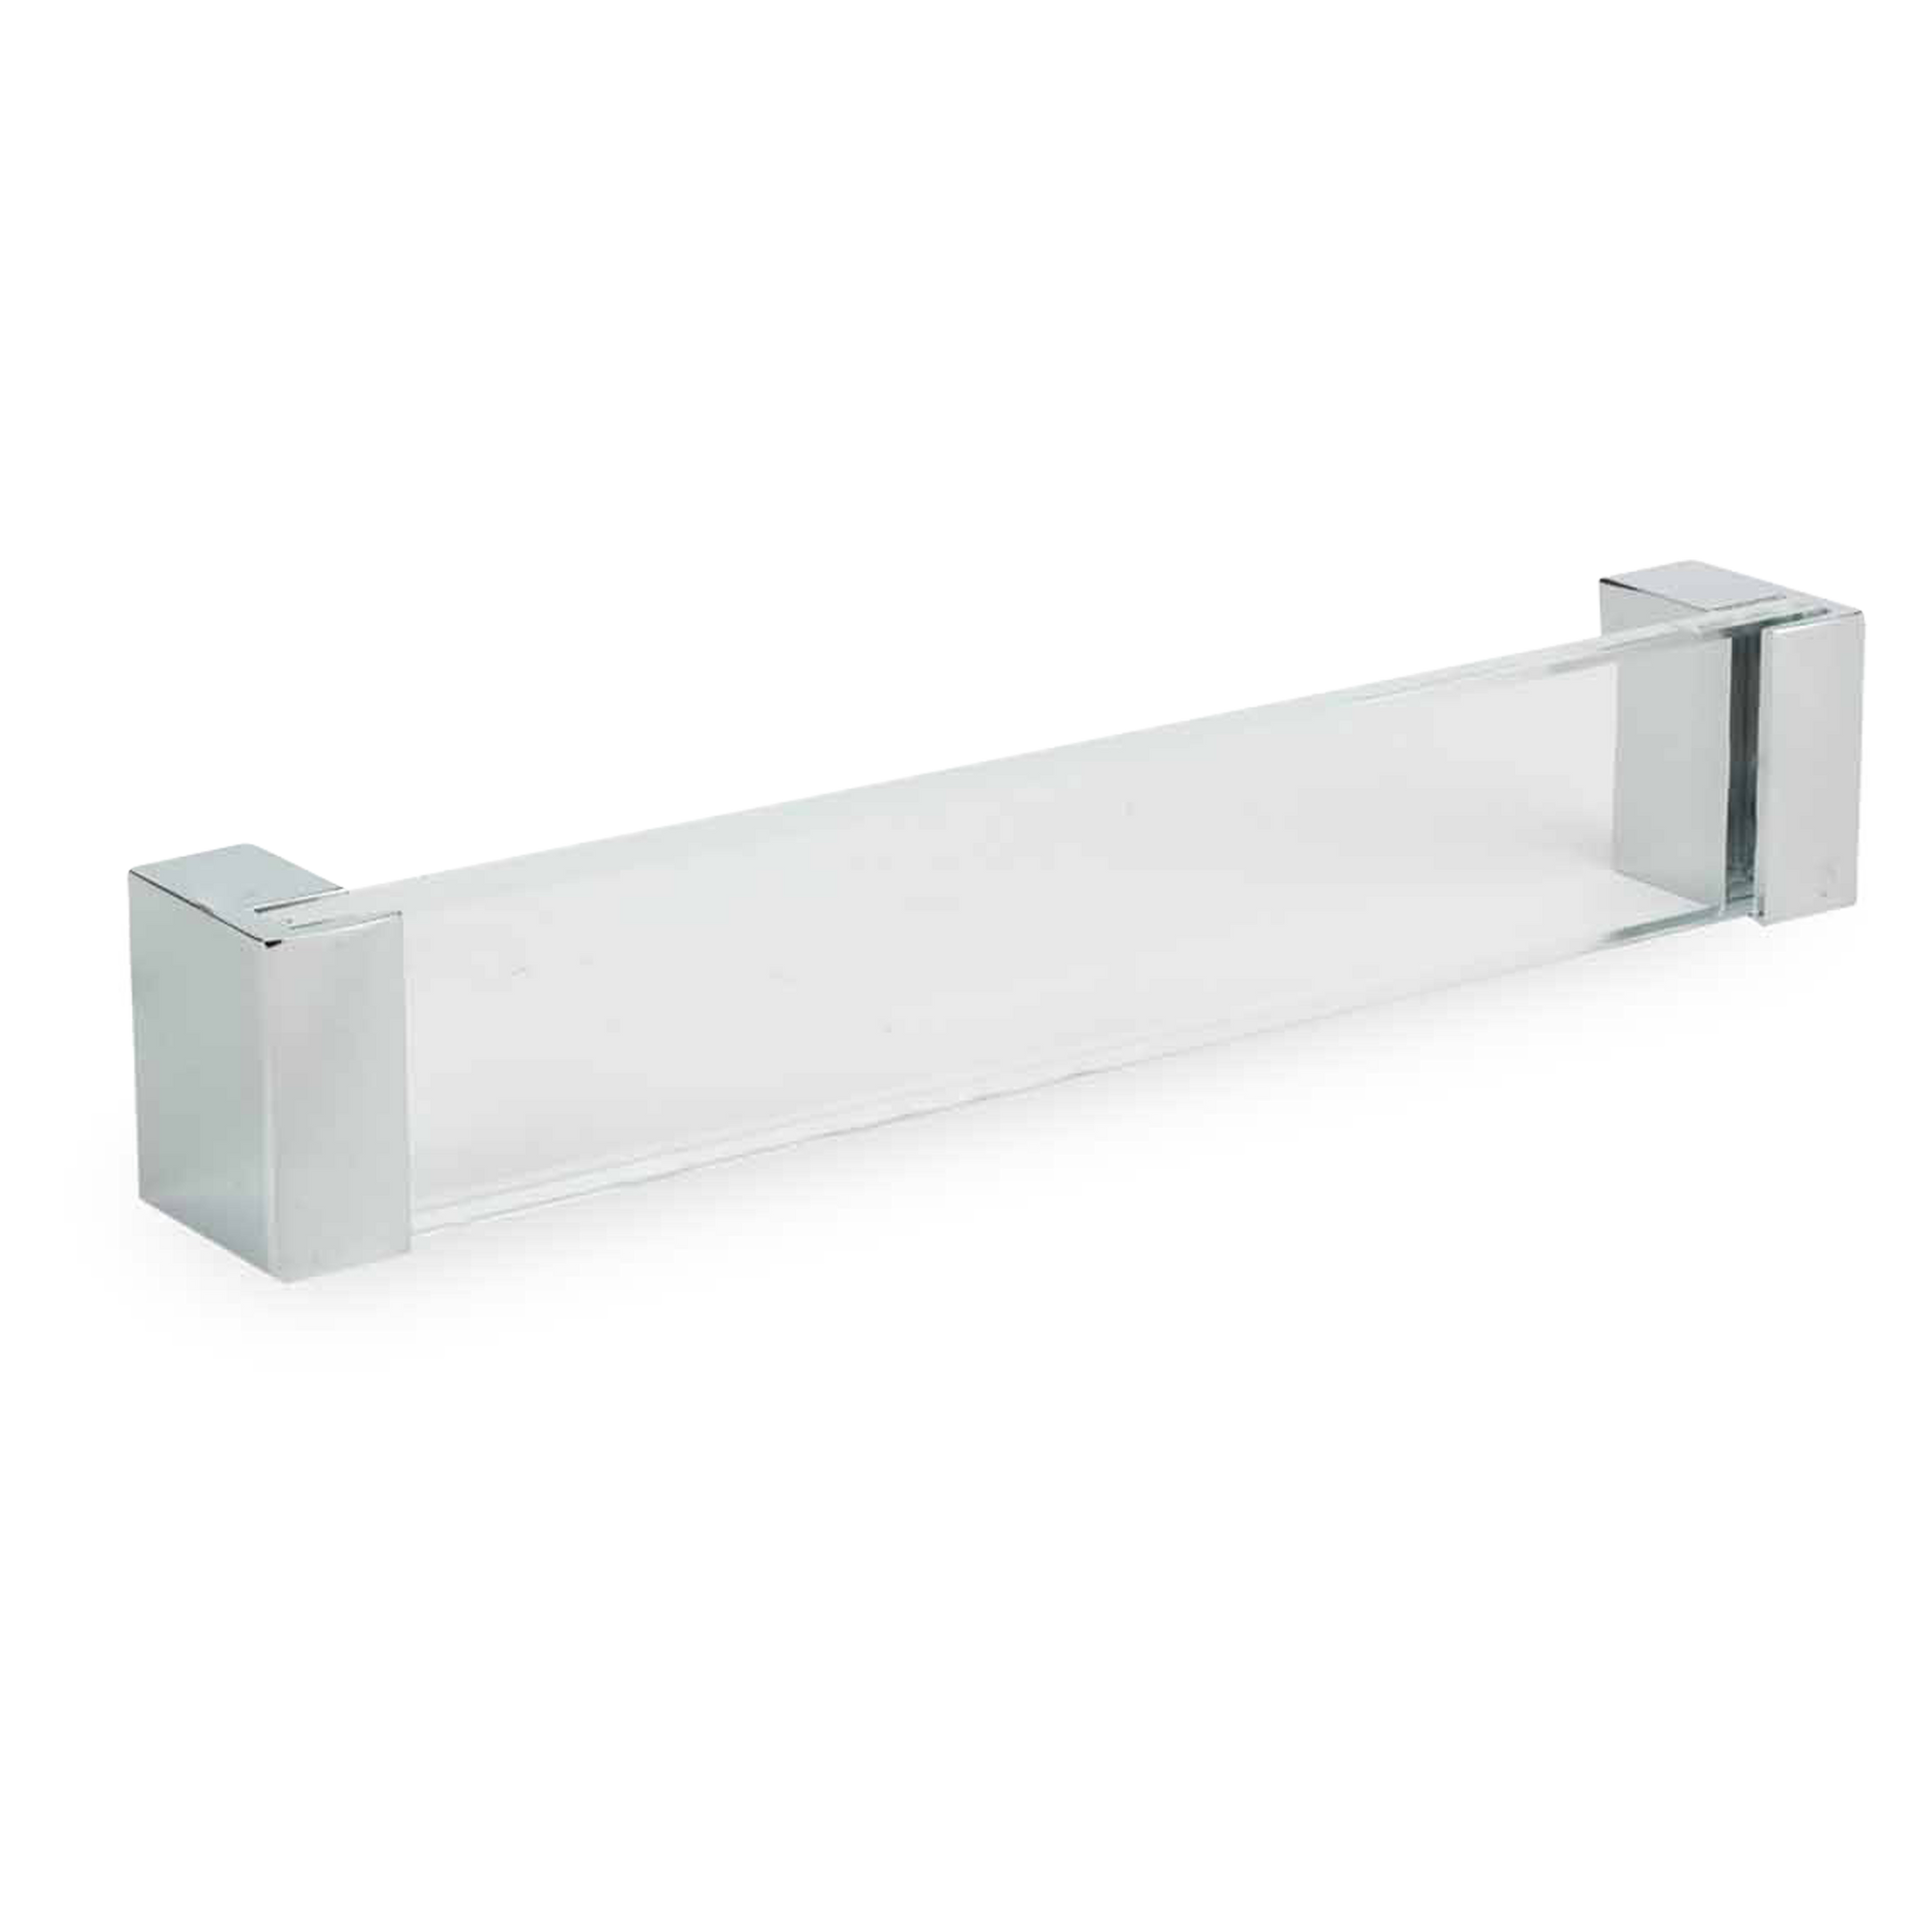 The Aeorlin Pull features a modern look, made of acrylic with chrome accents.